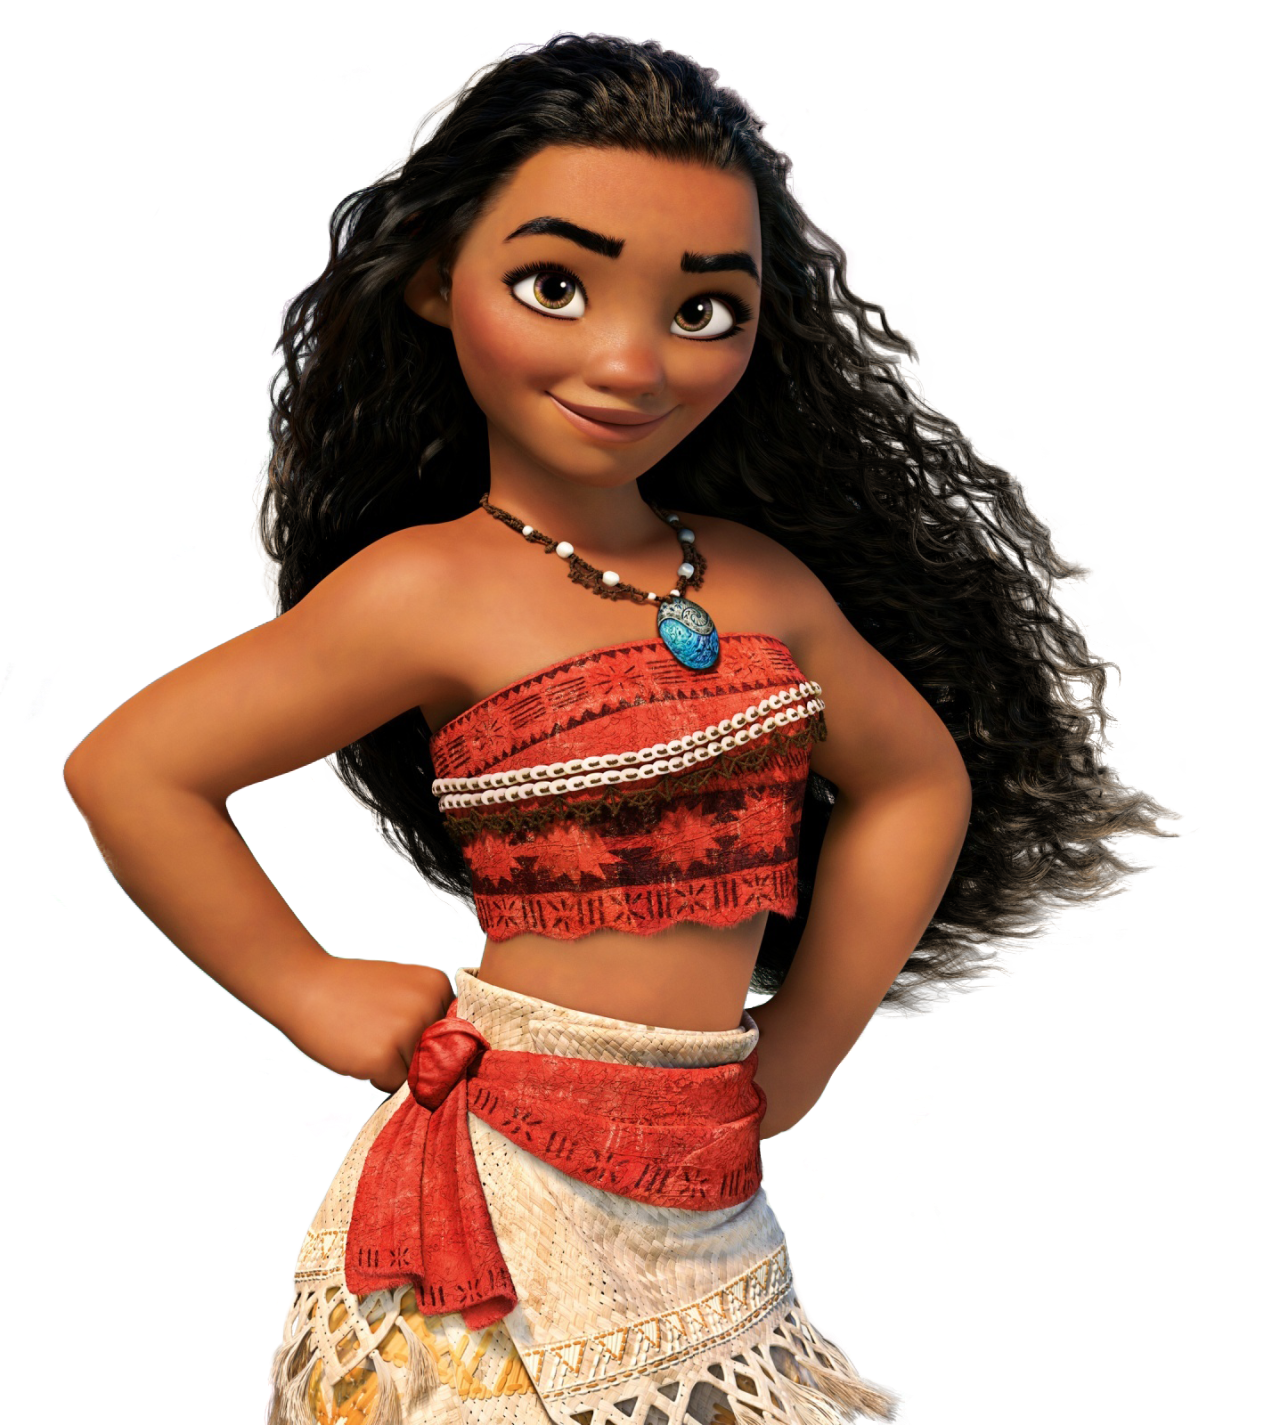 Moana High-Quality Disney PNG Image High Quality PNG Image